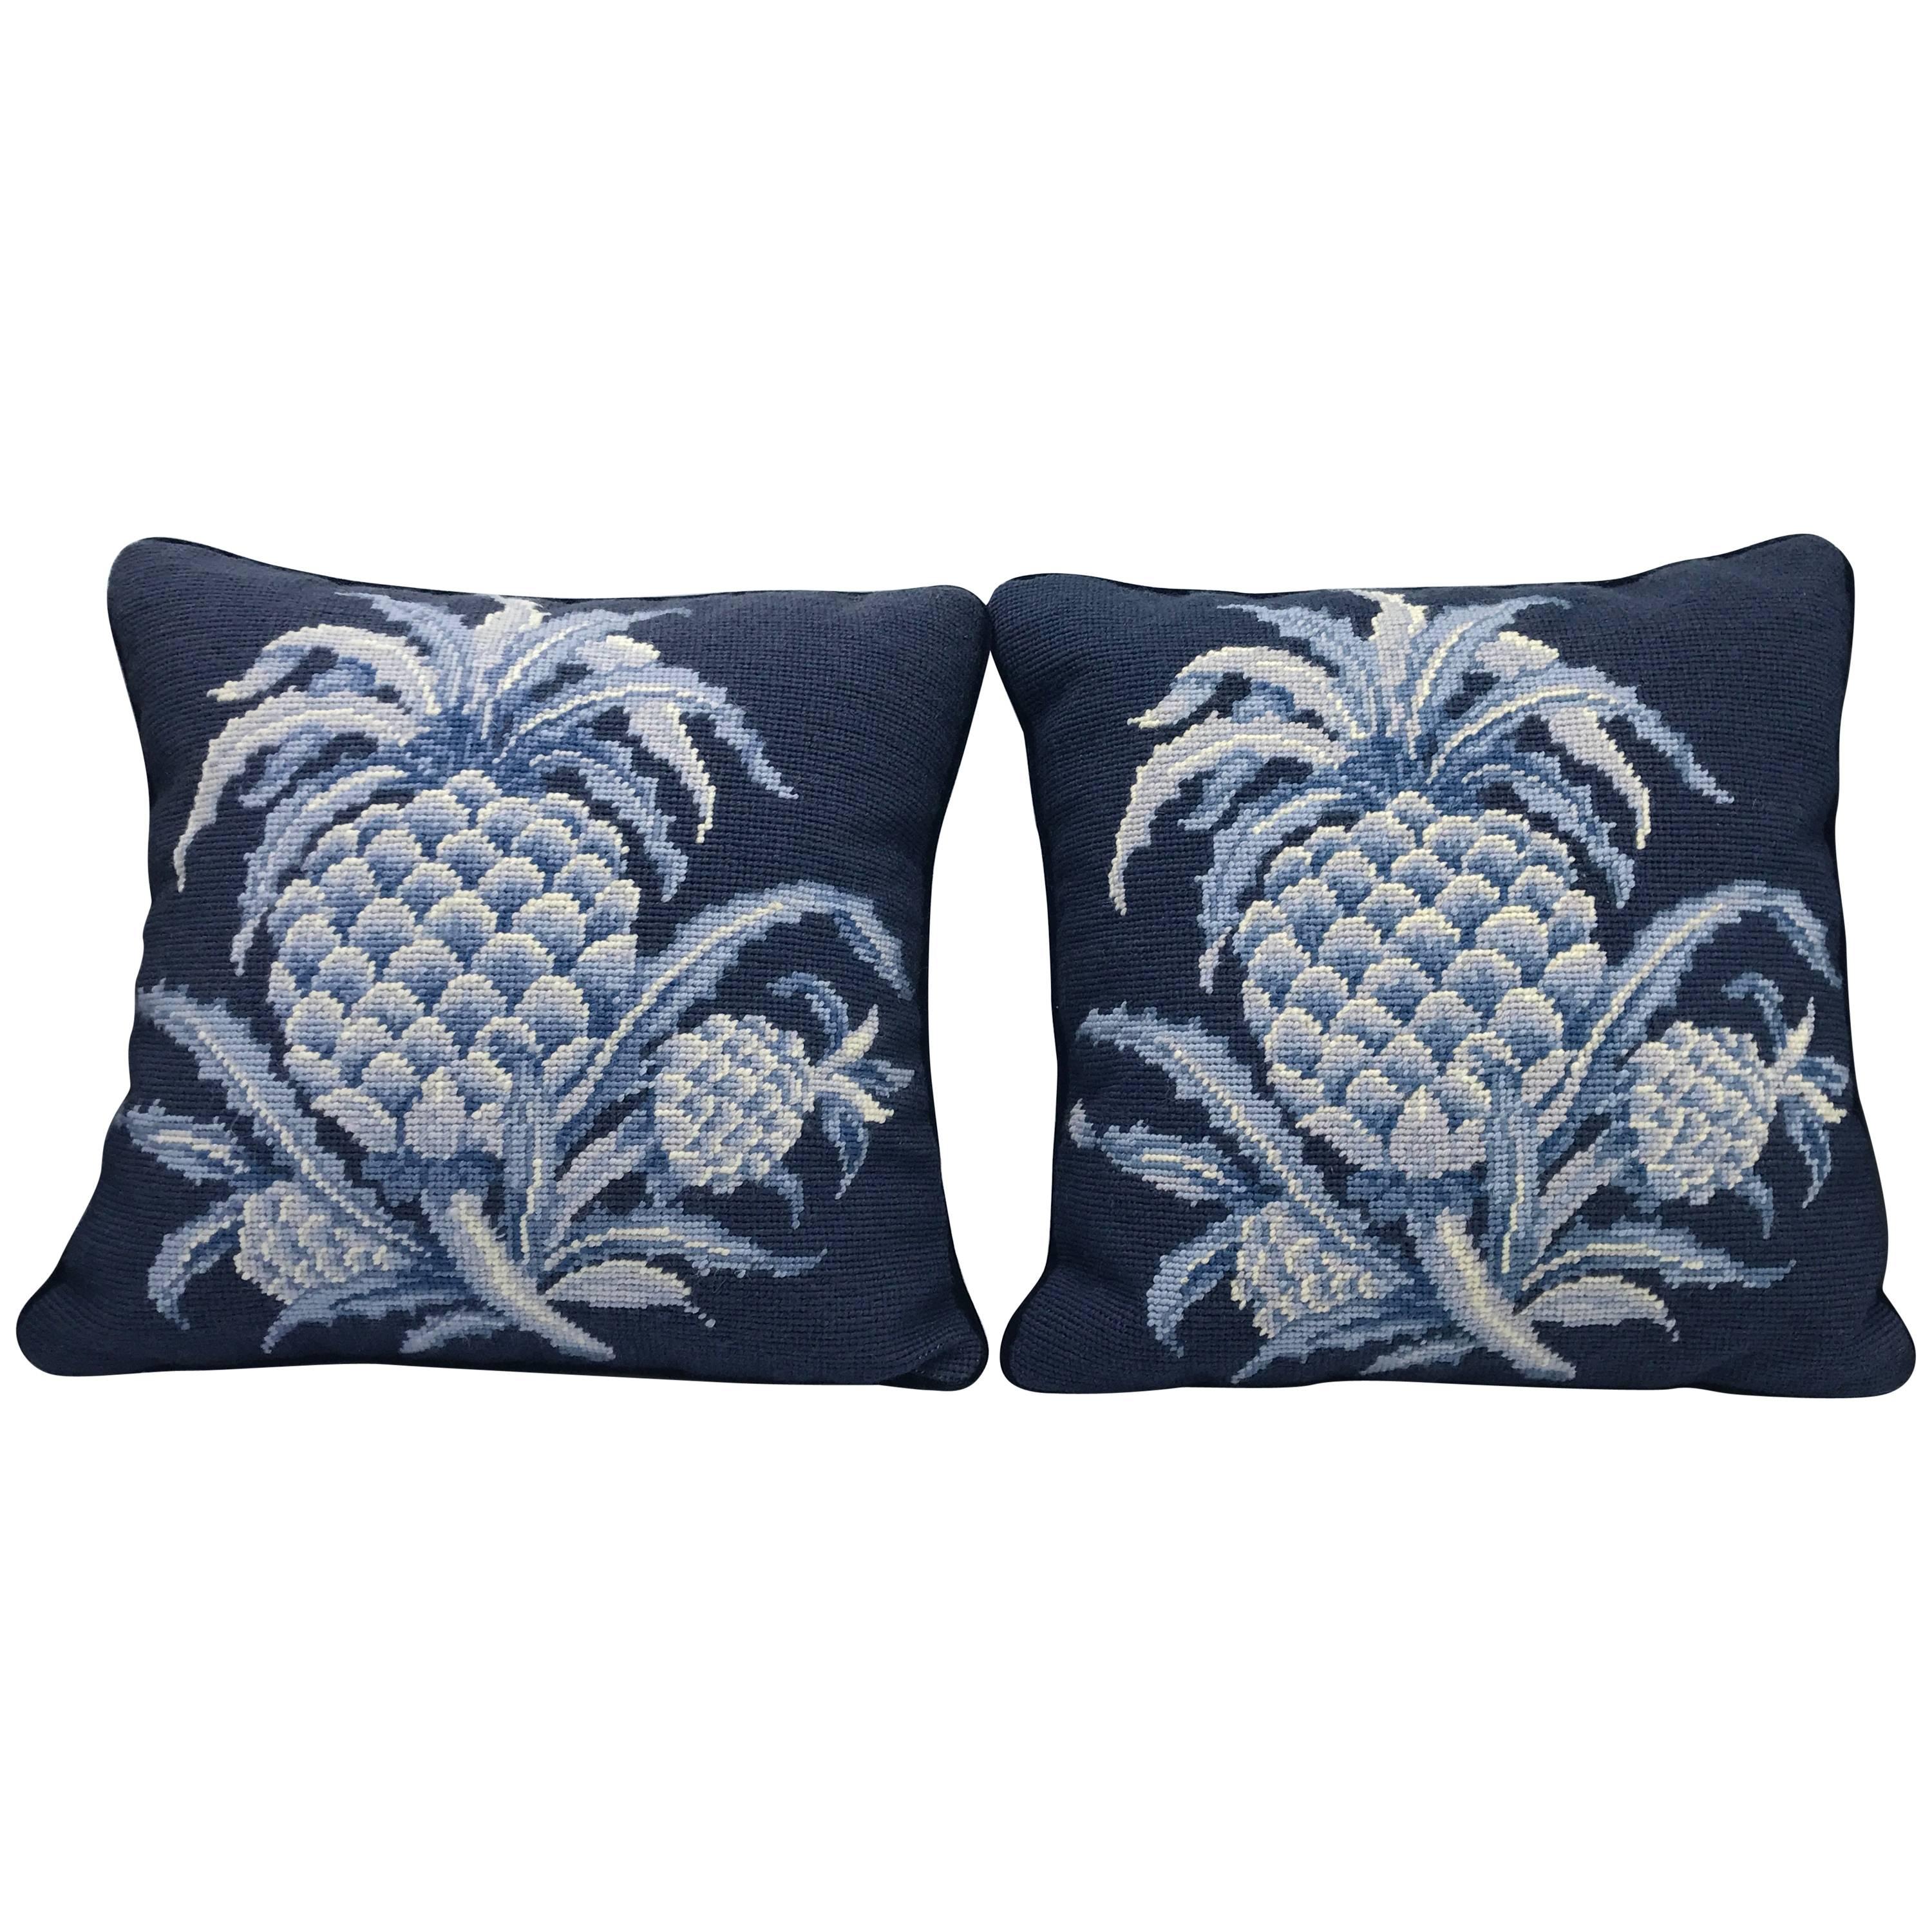 1980s Blue and White Pineapple Motif Needlepoint Pillows, Pair